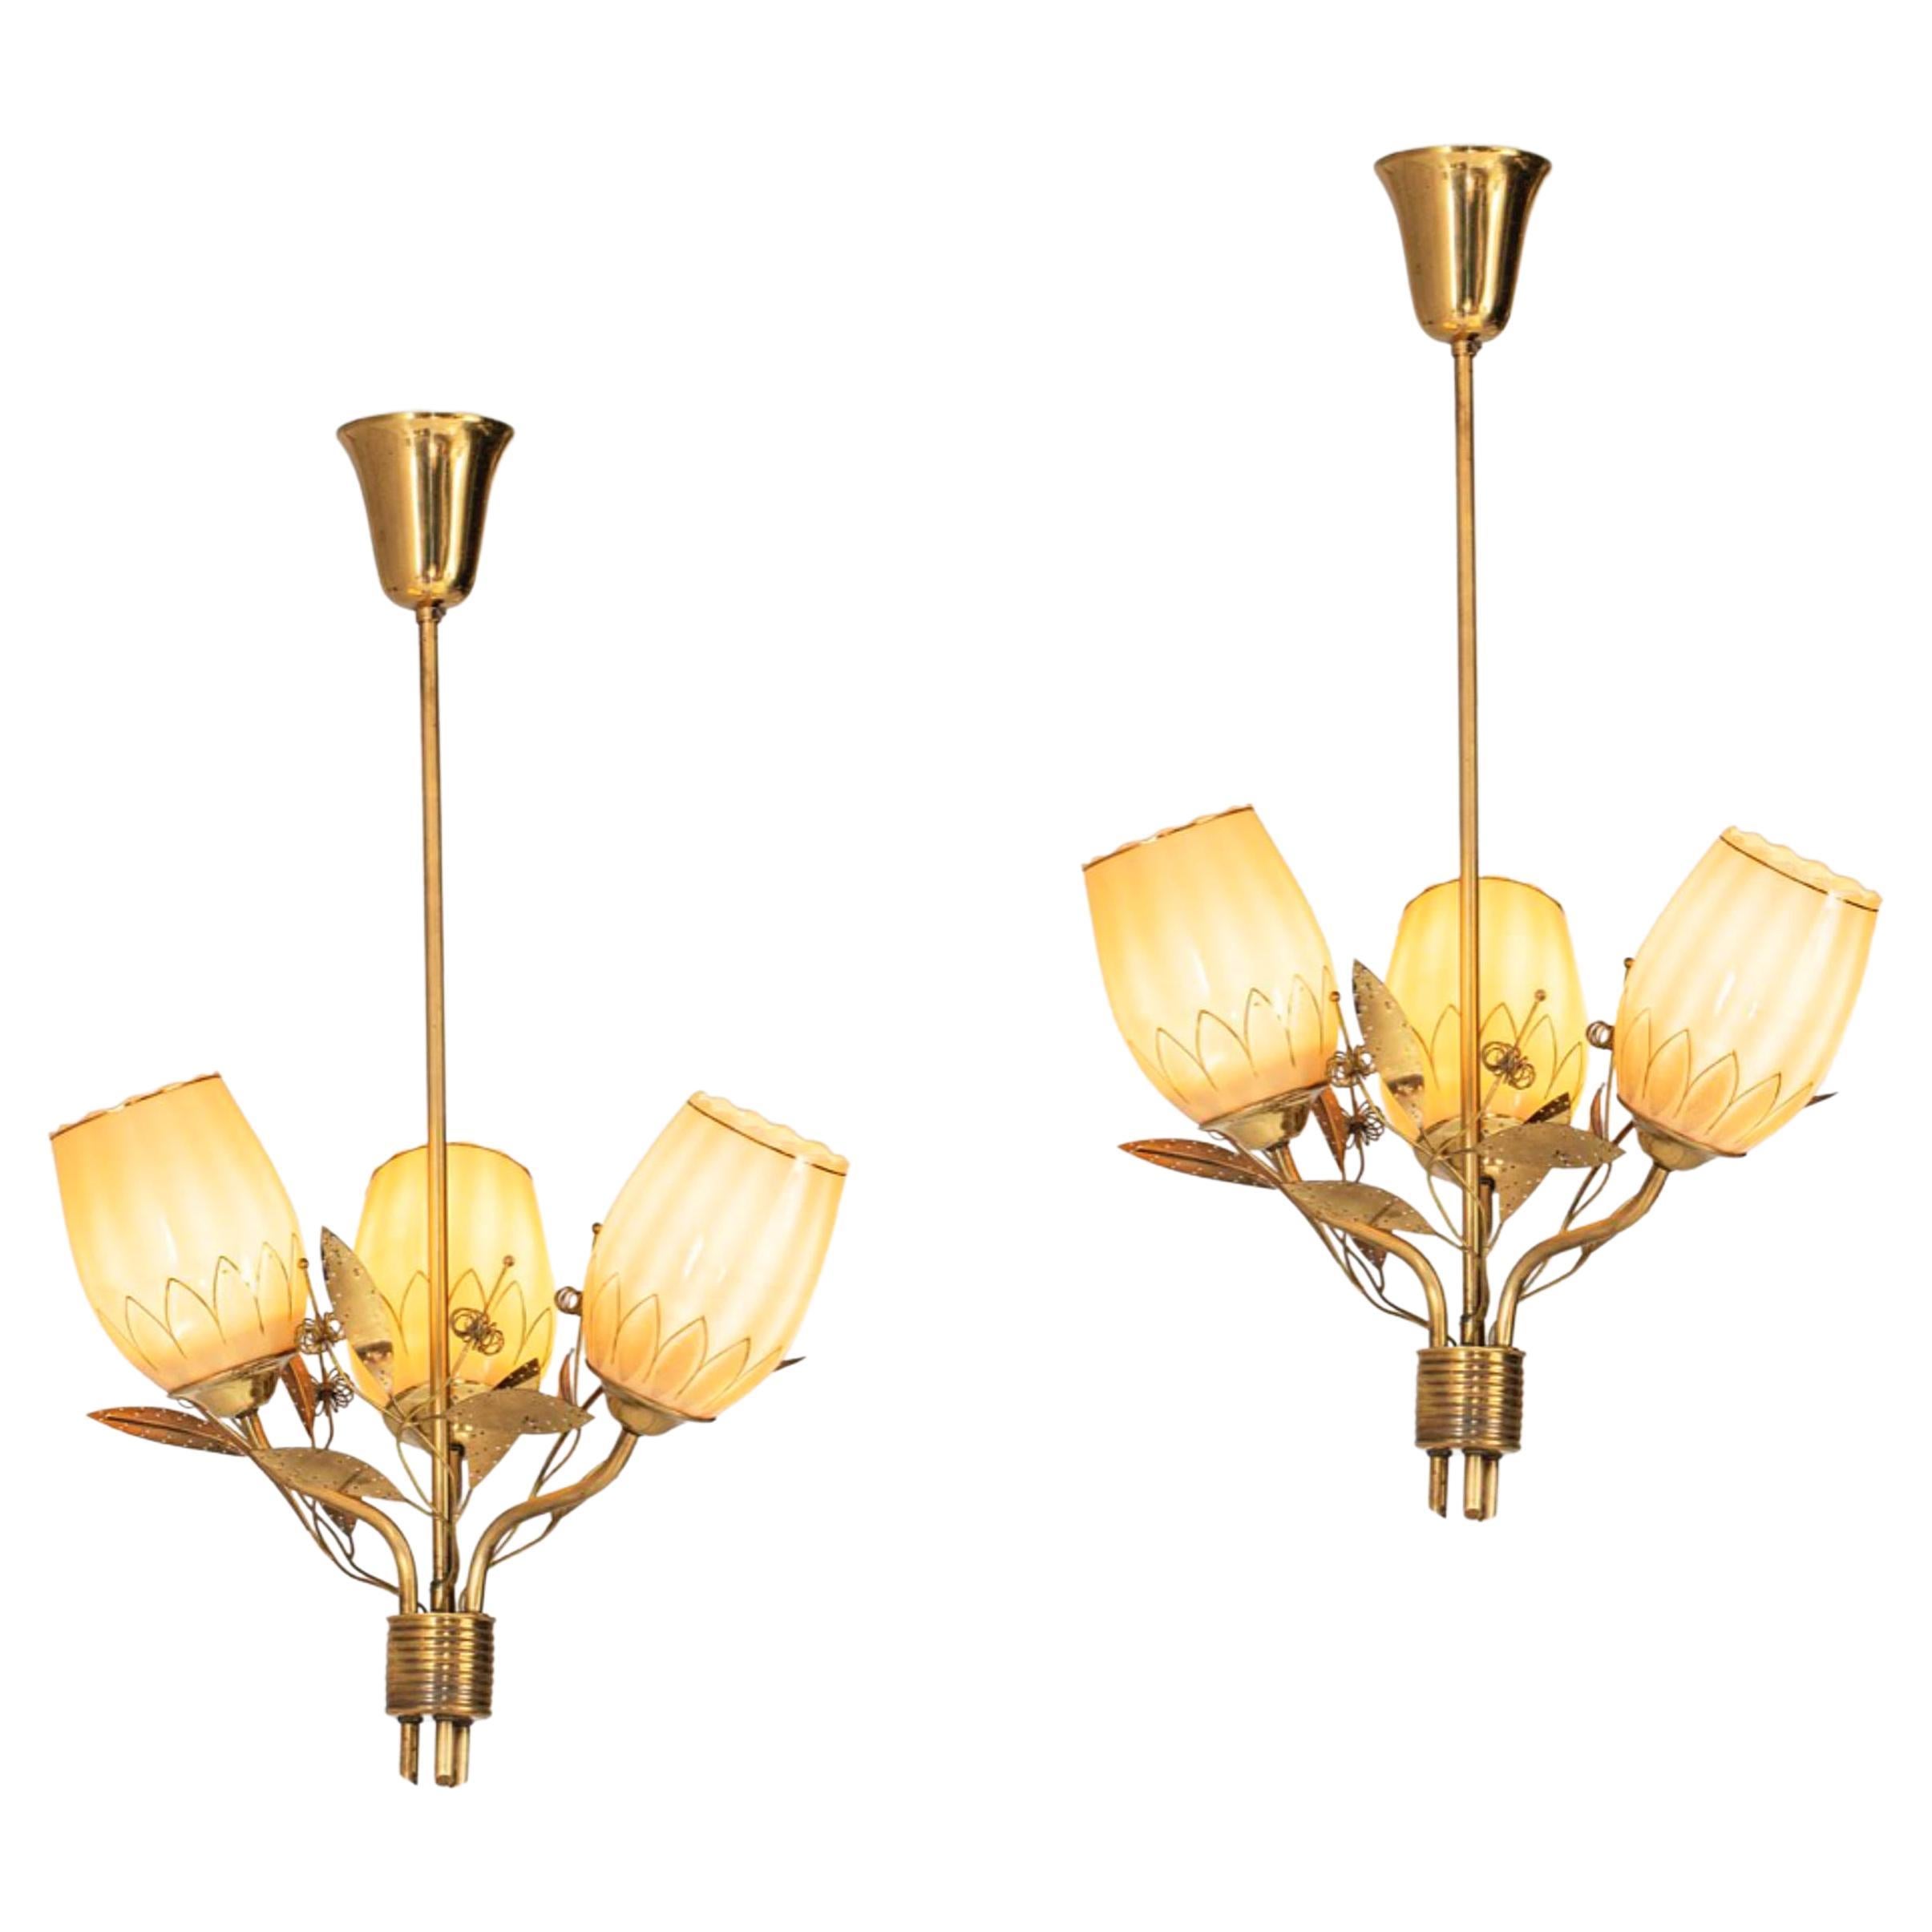 Rare Chandeliers / Pendant Ceiling Lights by Itsu, Finland, 1950s For Sale